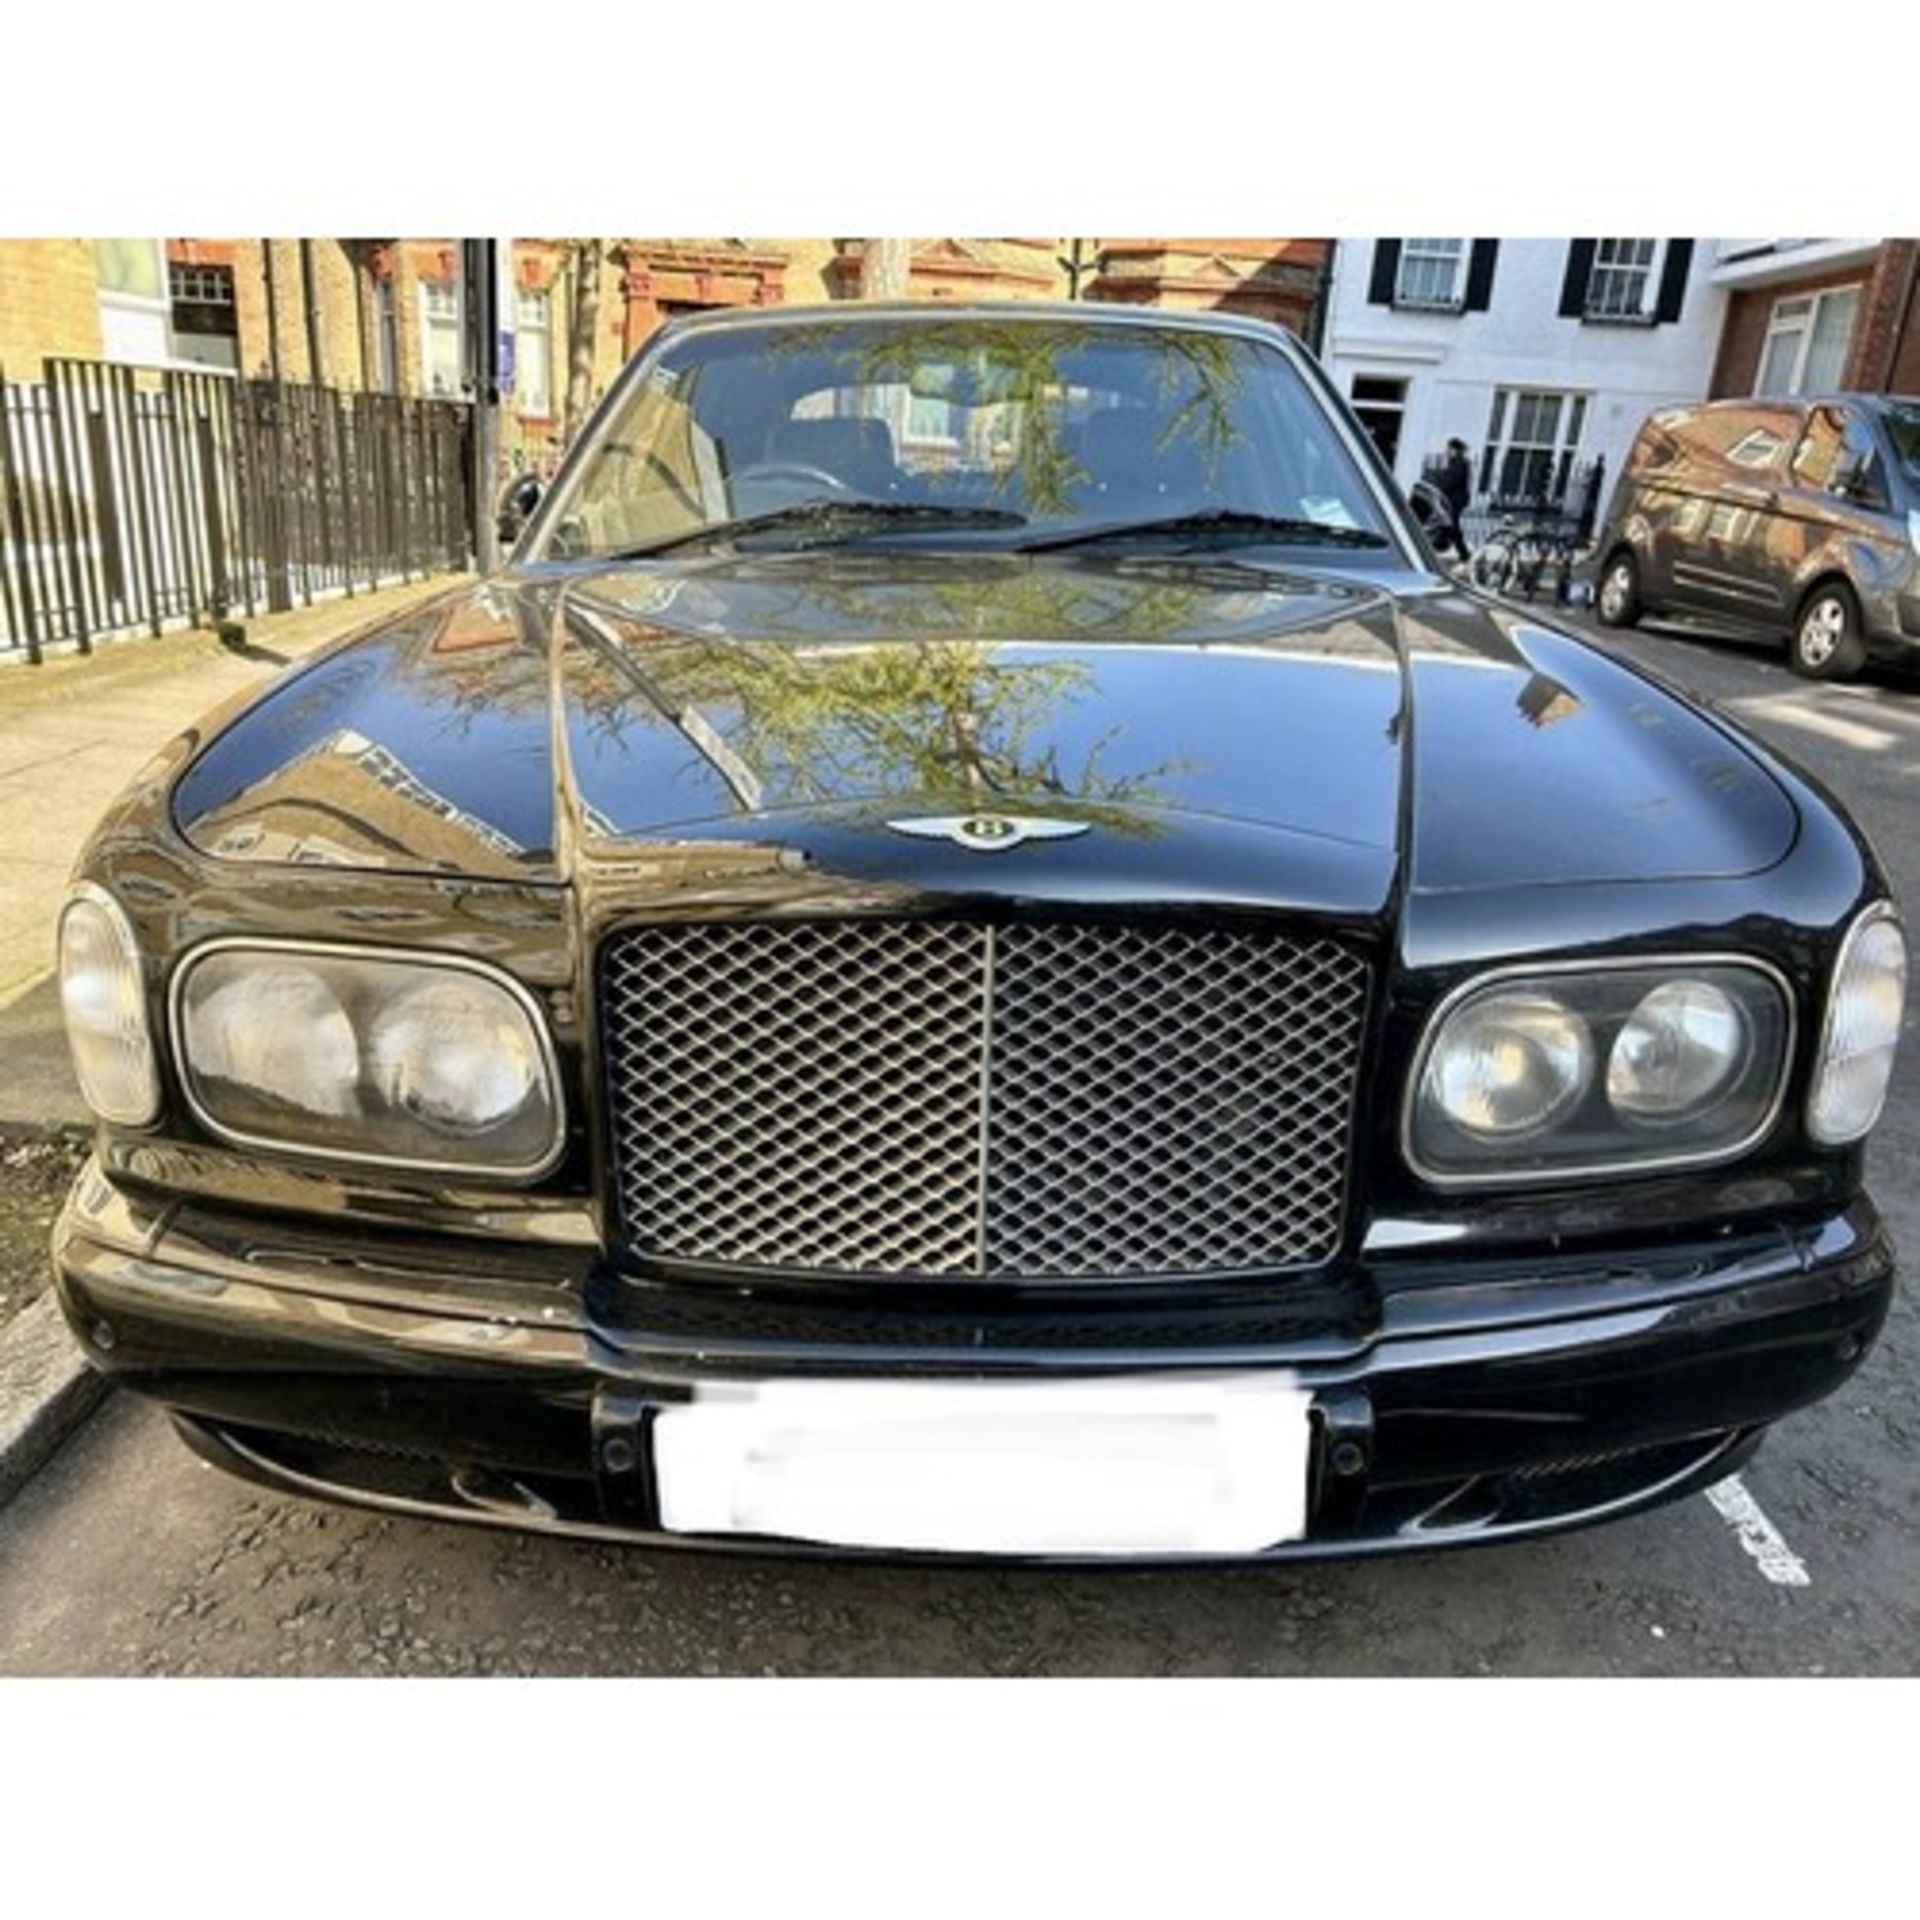 CELEBRATE THE CORONATION WITH A BENTLEY ARNAGE – FIT FOR A KING Bentley Arnage R, 6750cc V8 - Image 7 of 17